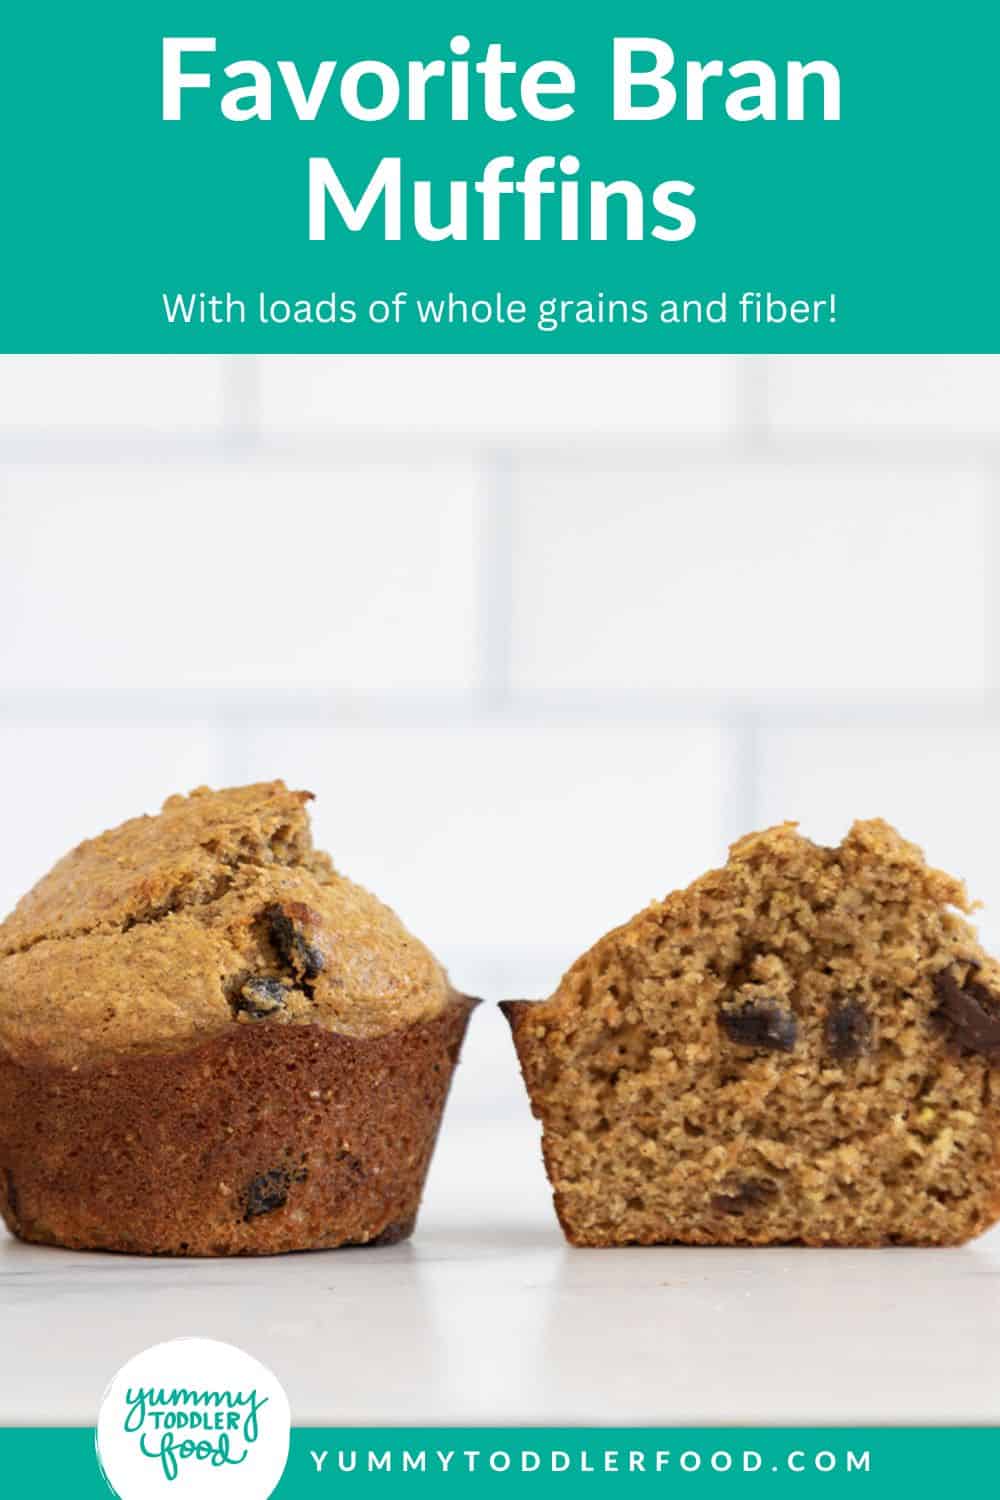 how to make bran muffins in grid of 4 images.